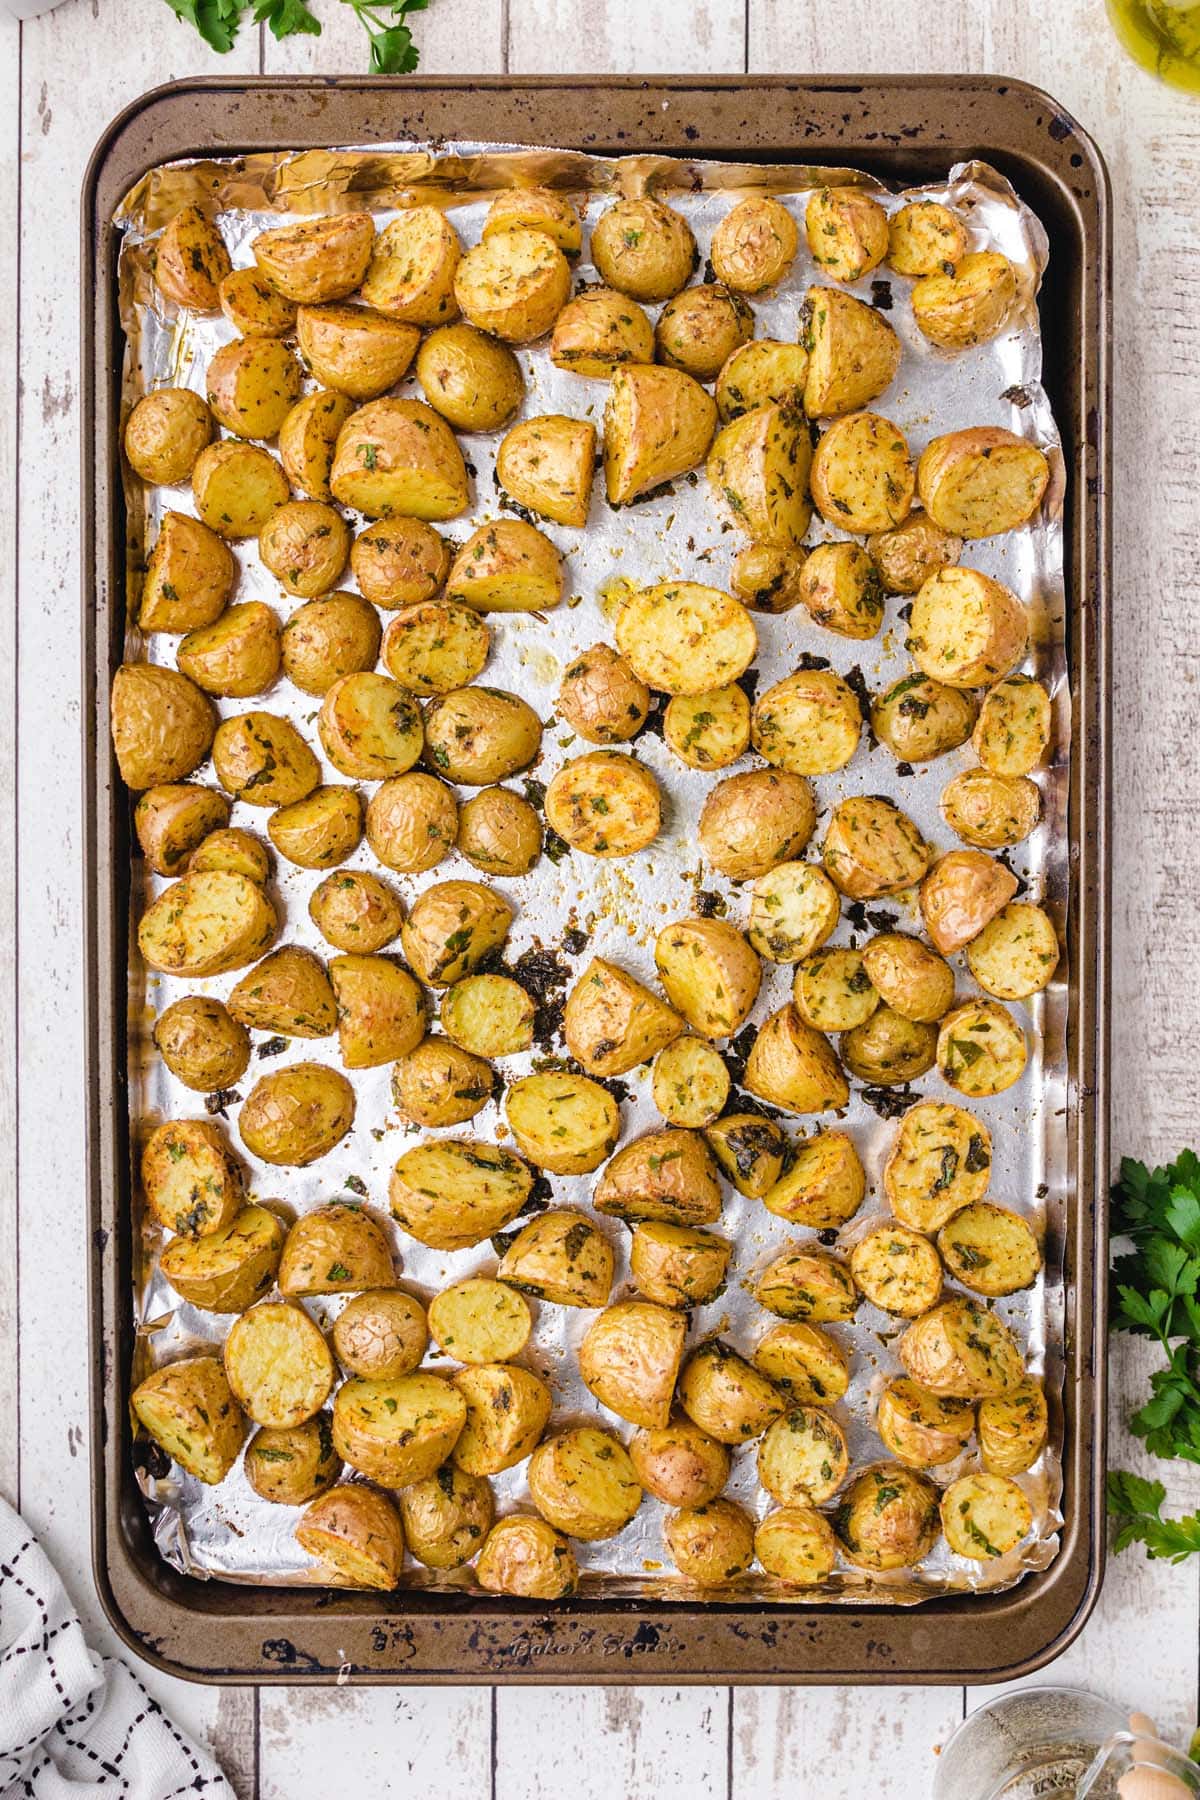 oven roasted potatoes in baking sheet